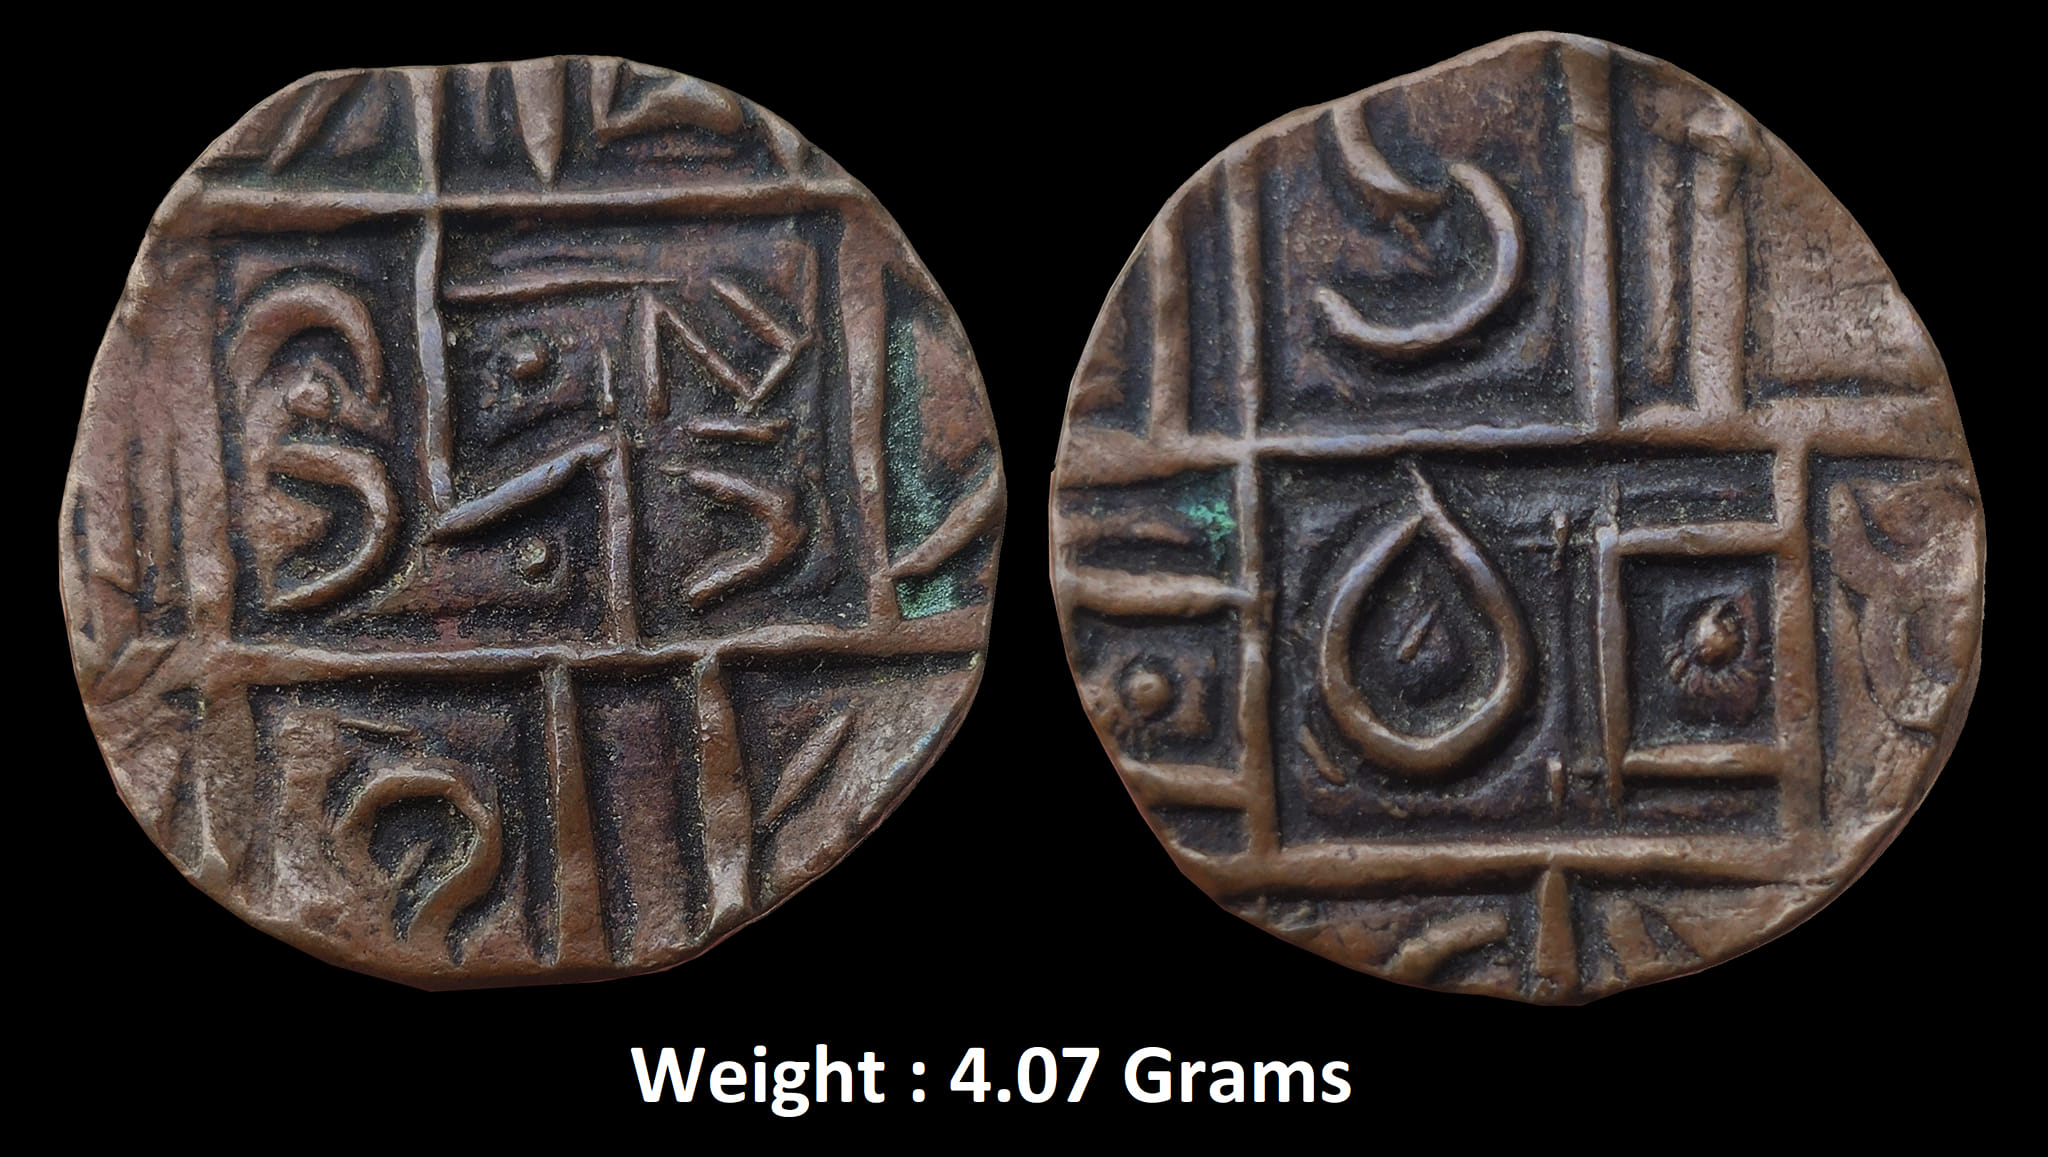 Kingdom of Bhutan ; Ma-tam (1/2 rupee), 1835-1910: Kingdom of Bhutan ; Debased
ND (no date) ; Debased ; Hammered coinage.
Symbols of Buddhism and Dzongkha letters.
Weight : 4.07 Grams
Letter "Sa" from Dzongkha language (the precise significance of the letter Sa is unknown, but it must have something to do with "land"; many old personal seals of Bhutanese officials have the letter Sa, so it was probably intended to distinguish coins issued by one of the important issuing authorities).